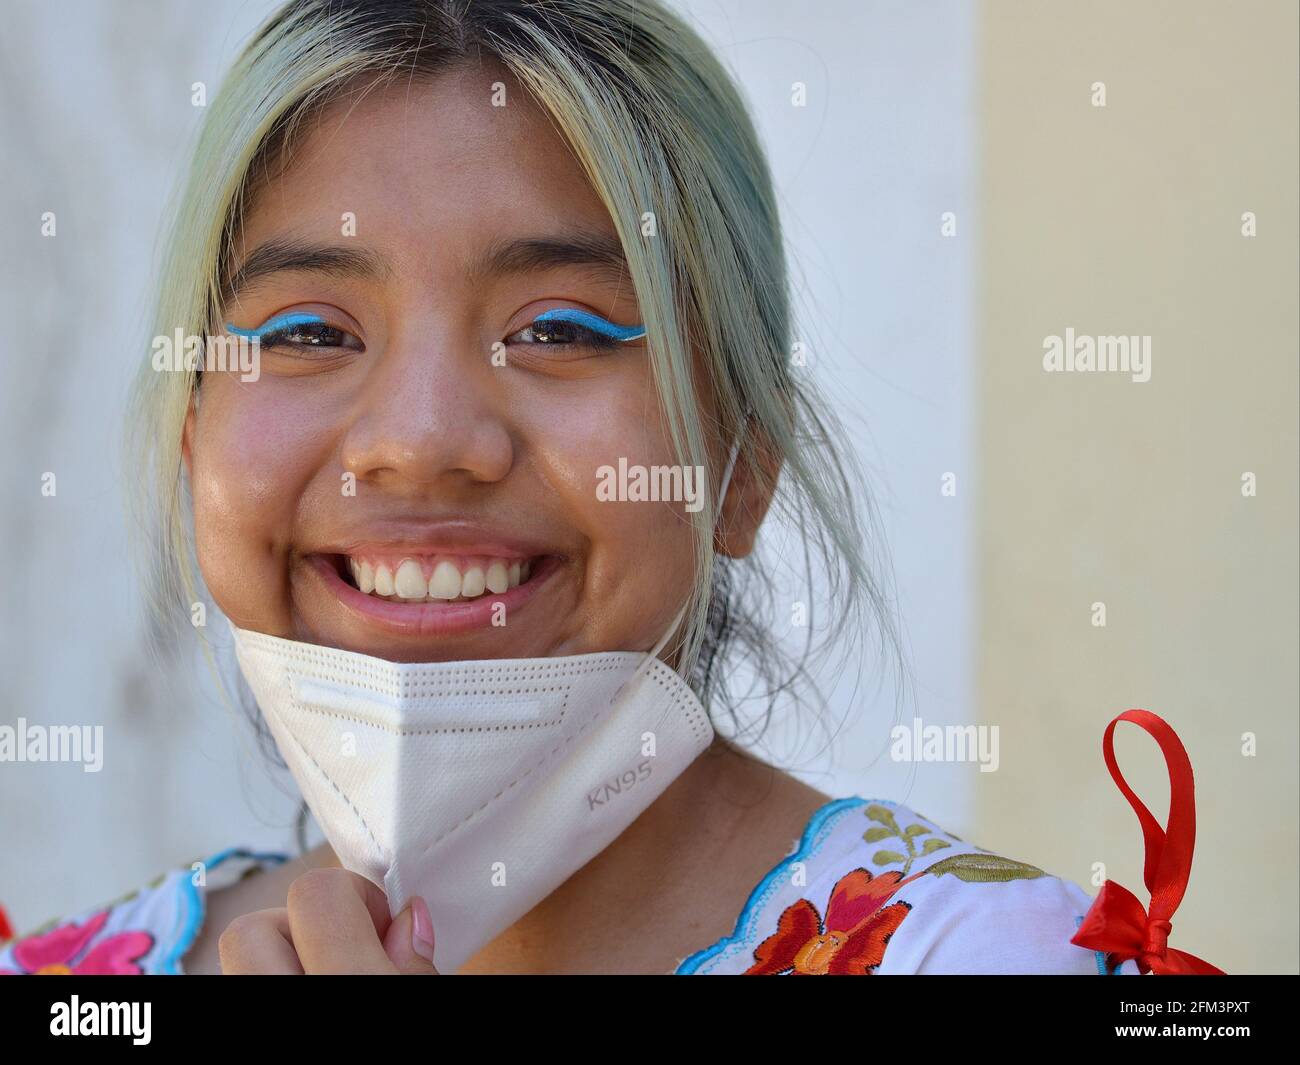 Cheerful Mexican teen girl with elaborate blue eye makeup pulls down her white KN95 face mask and smiles for the camera during coronavirus pandemic. Stock Photo